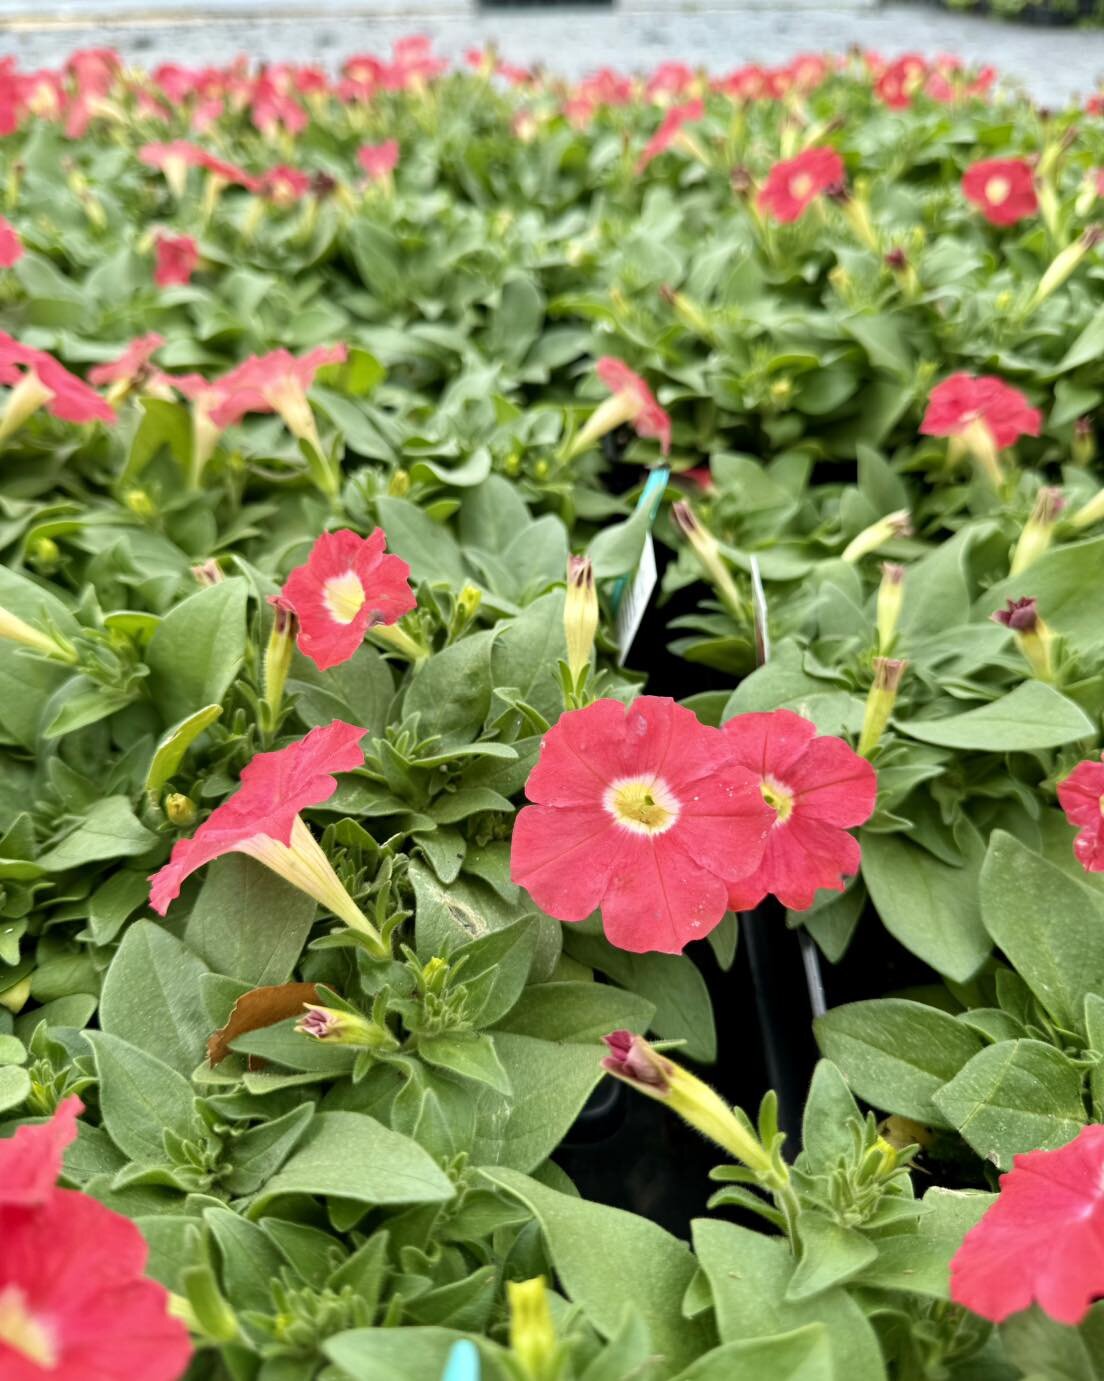 It&rsquo;s Petunia Madness! 🌸 

Petunias are colorful and loved for their easy care and enduring beauty. What&rsquo;s your favorite color? 

Simply Madness 
Midnight Madness 
Rose Madness or 
White Madness